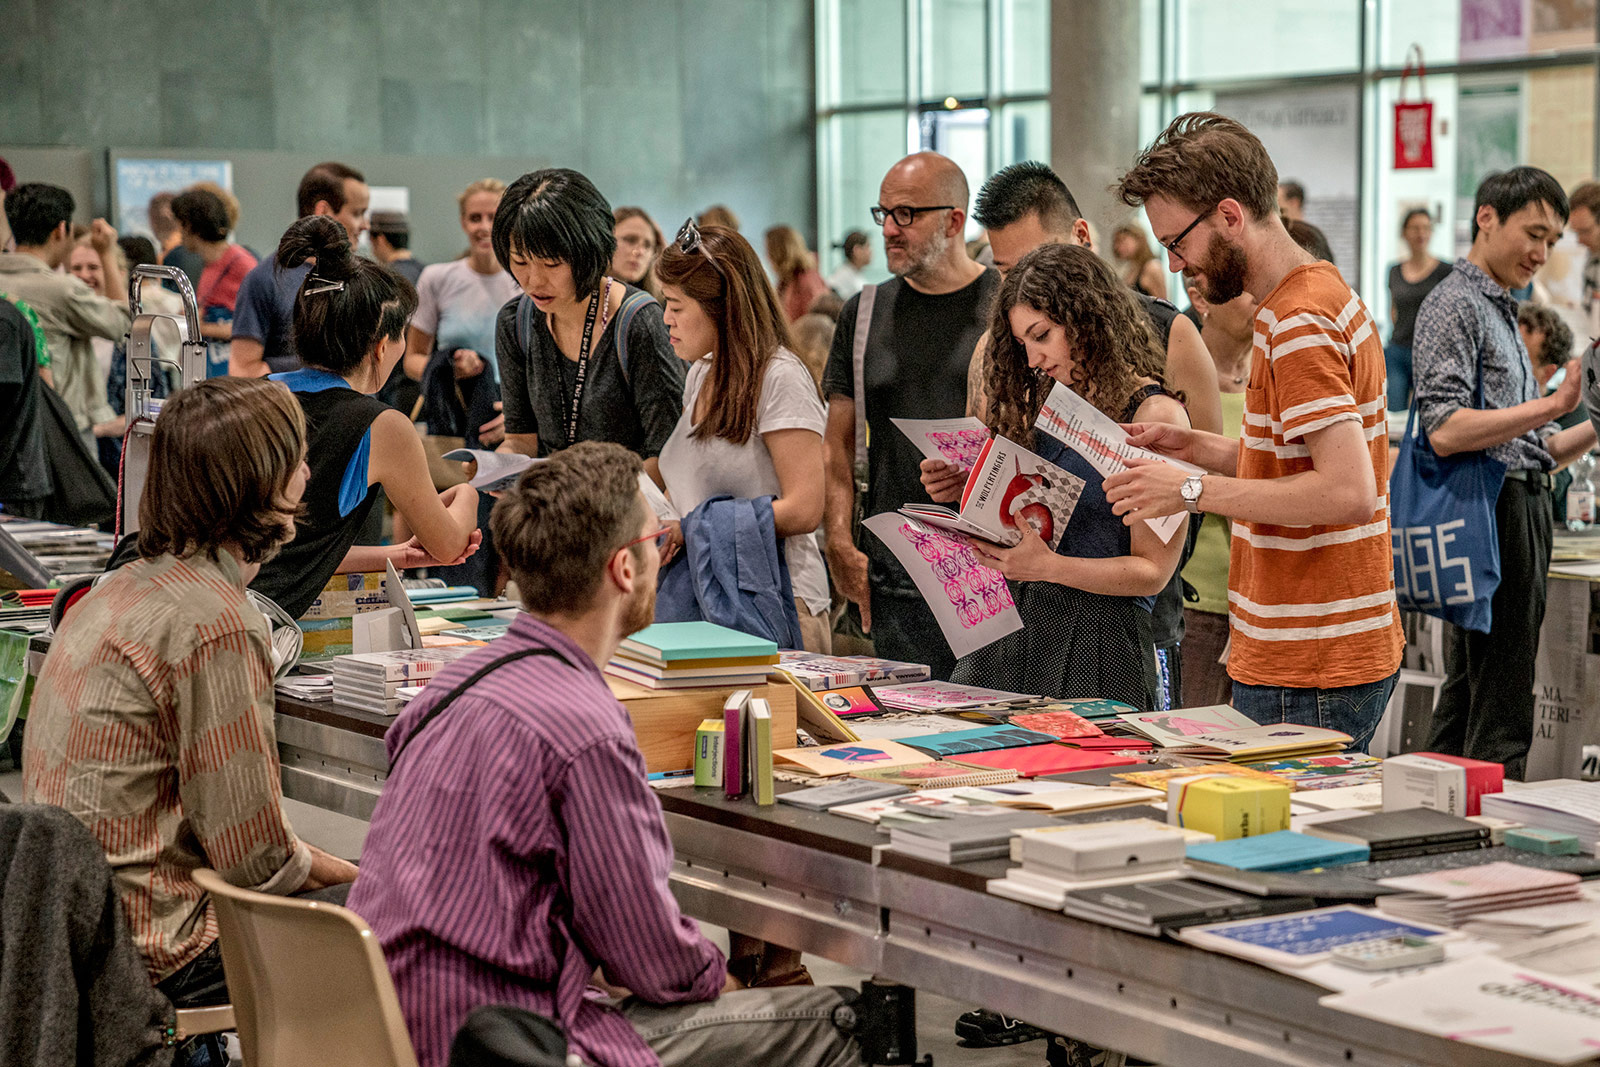 The Berlin Art Book Festival - Launch Of Decolonizing Art Book Fairs And IDEA POLL Publications